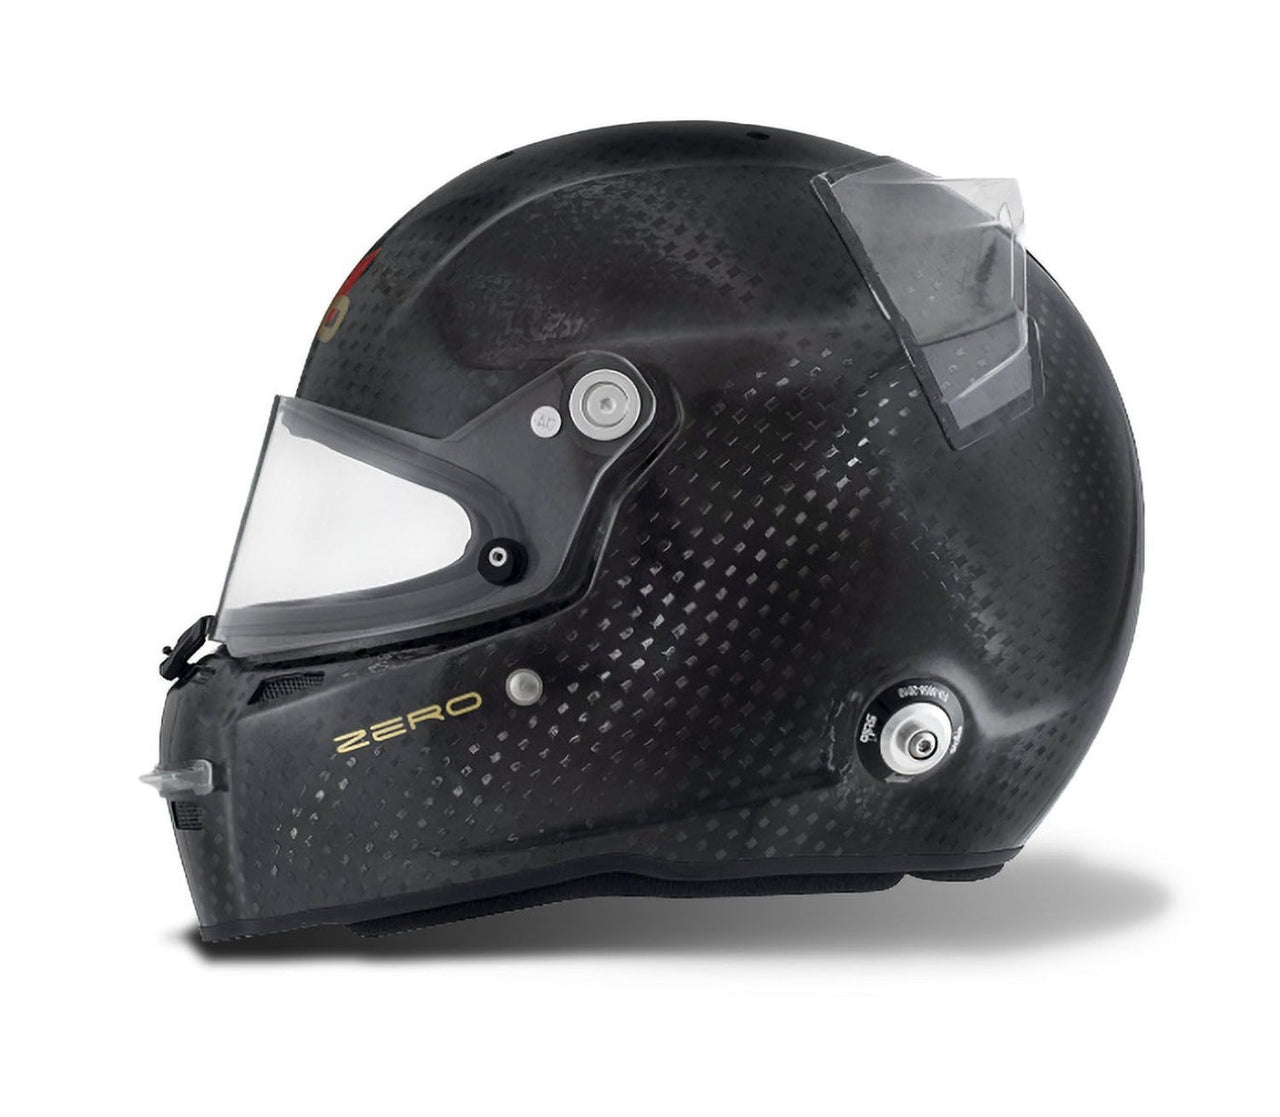 STILO ST5 FN ABP ZERO CARBON FIBER AUTO RACING HELMET IN STOCK AT THE LOWEST PRICES AND LARGEST DISCOUNTS FOR THE BEST DEAL ON STILO ST5 FN ABP ZERO CARBON FIBER AUTO RACING HELMET PROFILE IMAGE